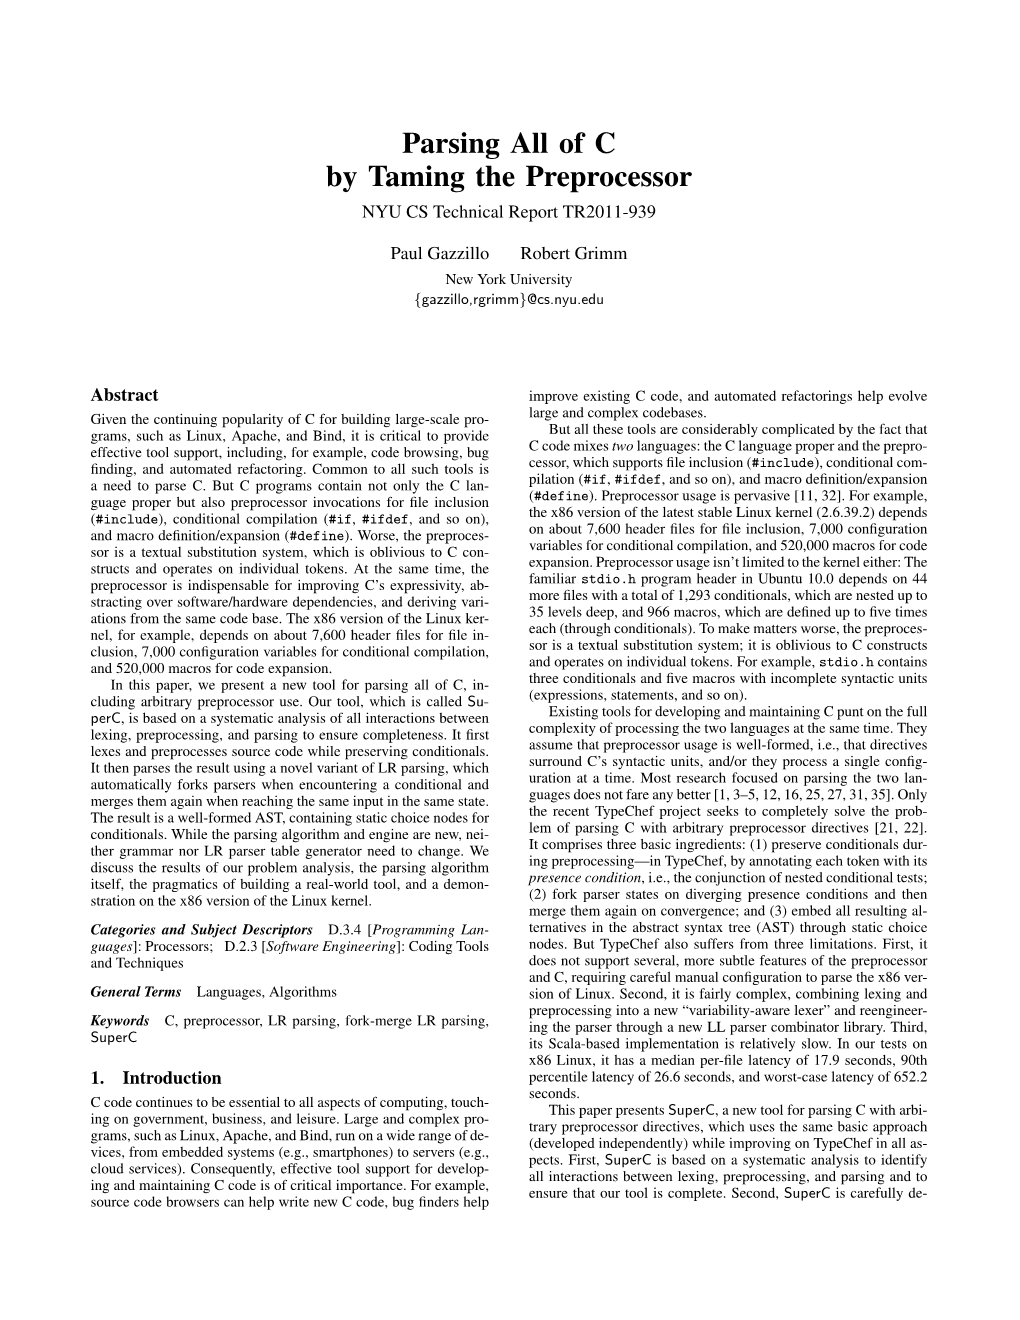 Parsing All of C by Taming the Preprocessor NYU CS Technical Report TR2011-939